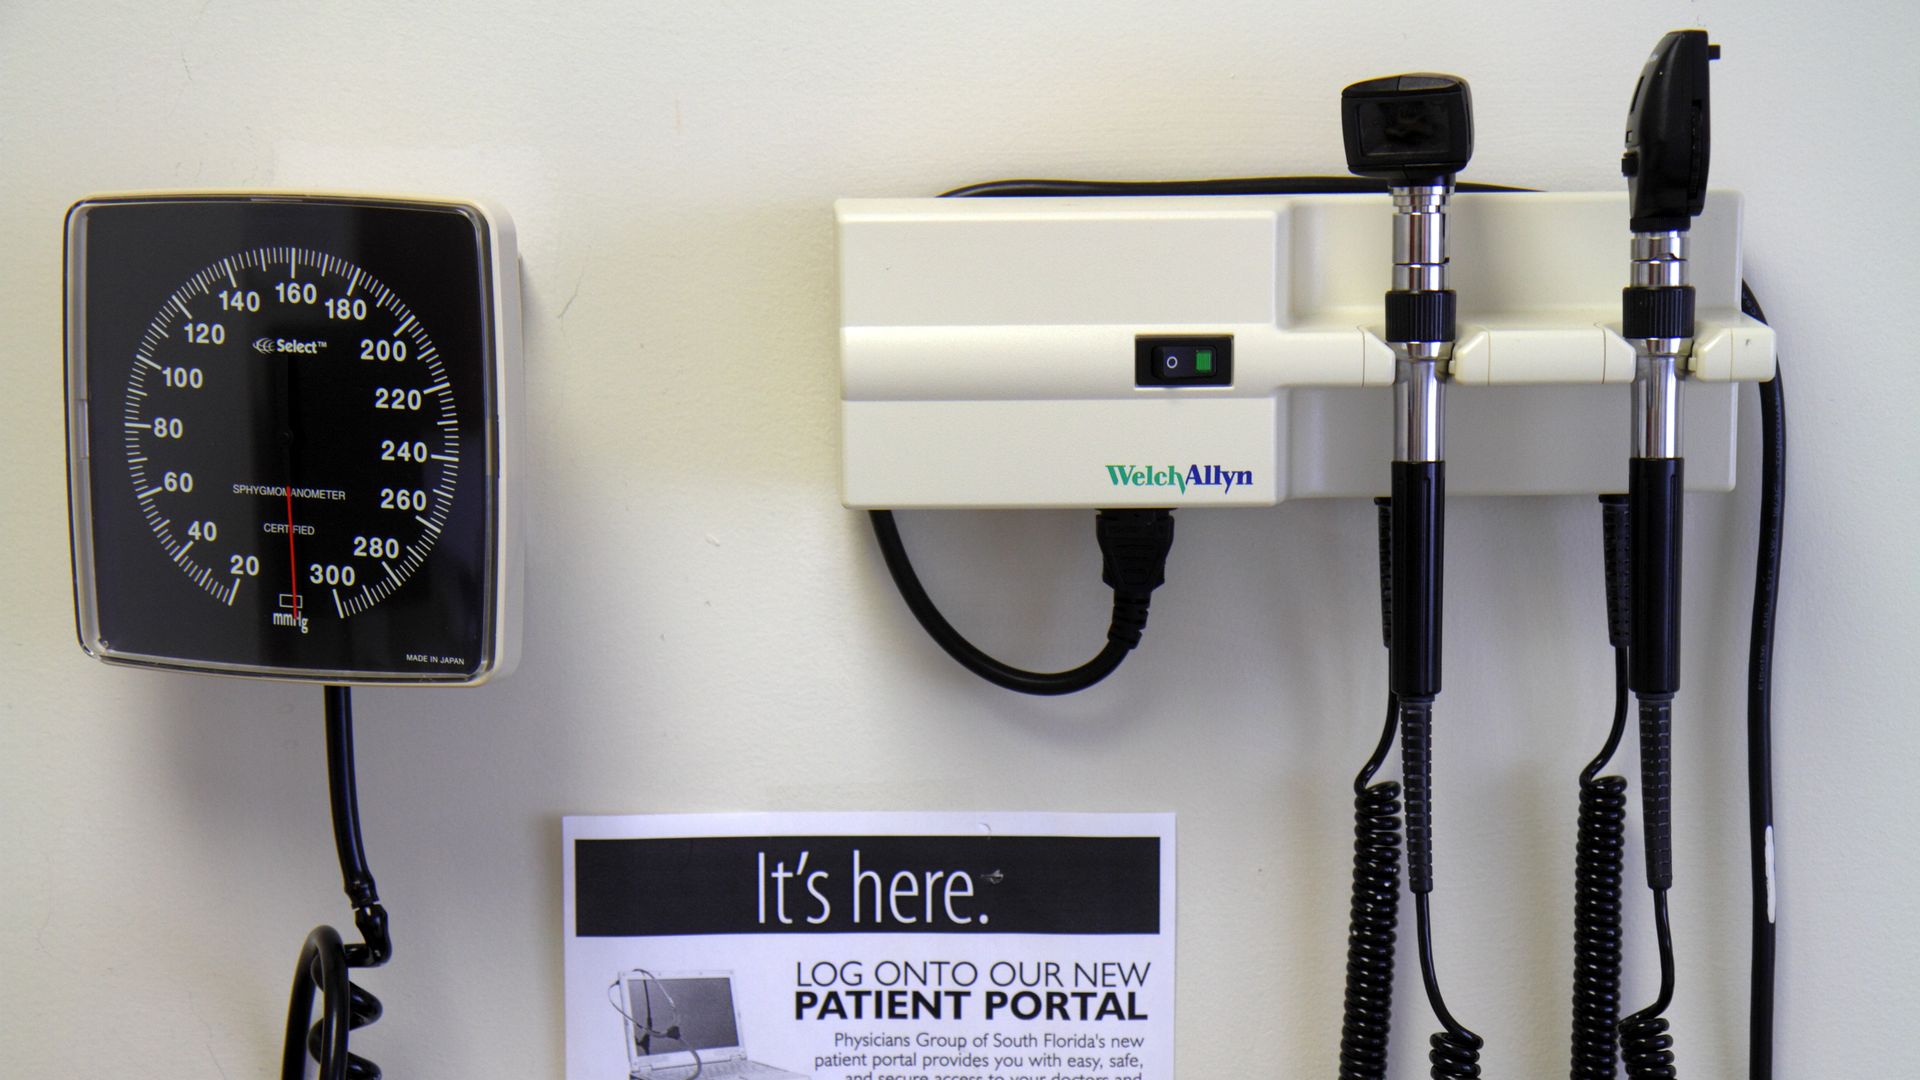 A blood pressure cuff, eye light, and ear tool hang on a wall in a doctor's office.